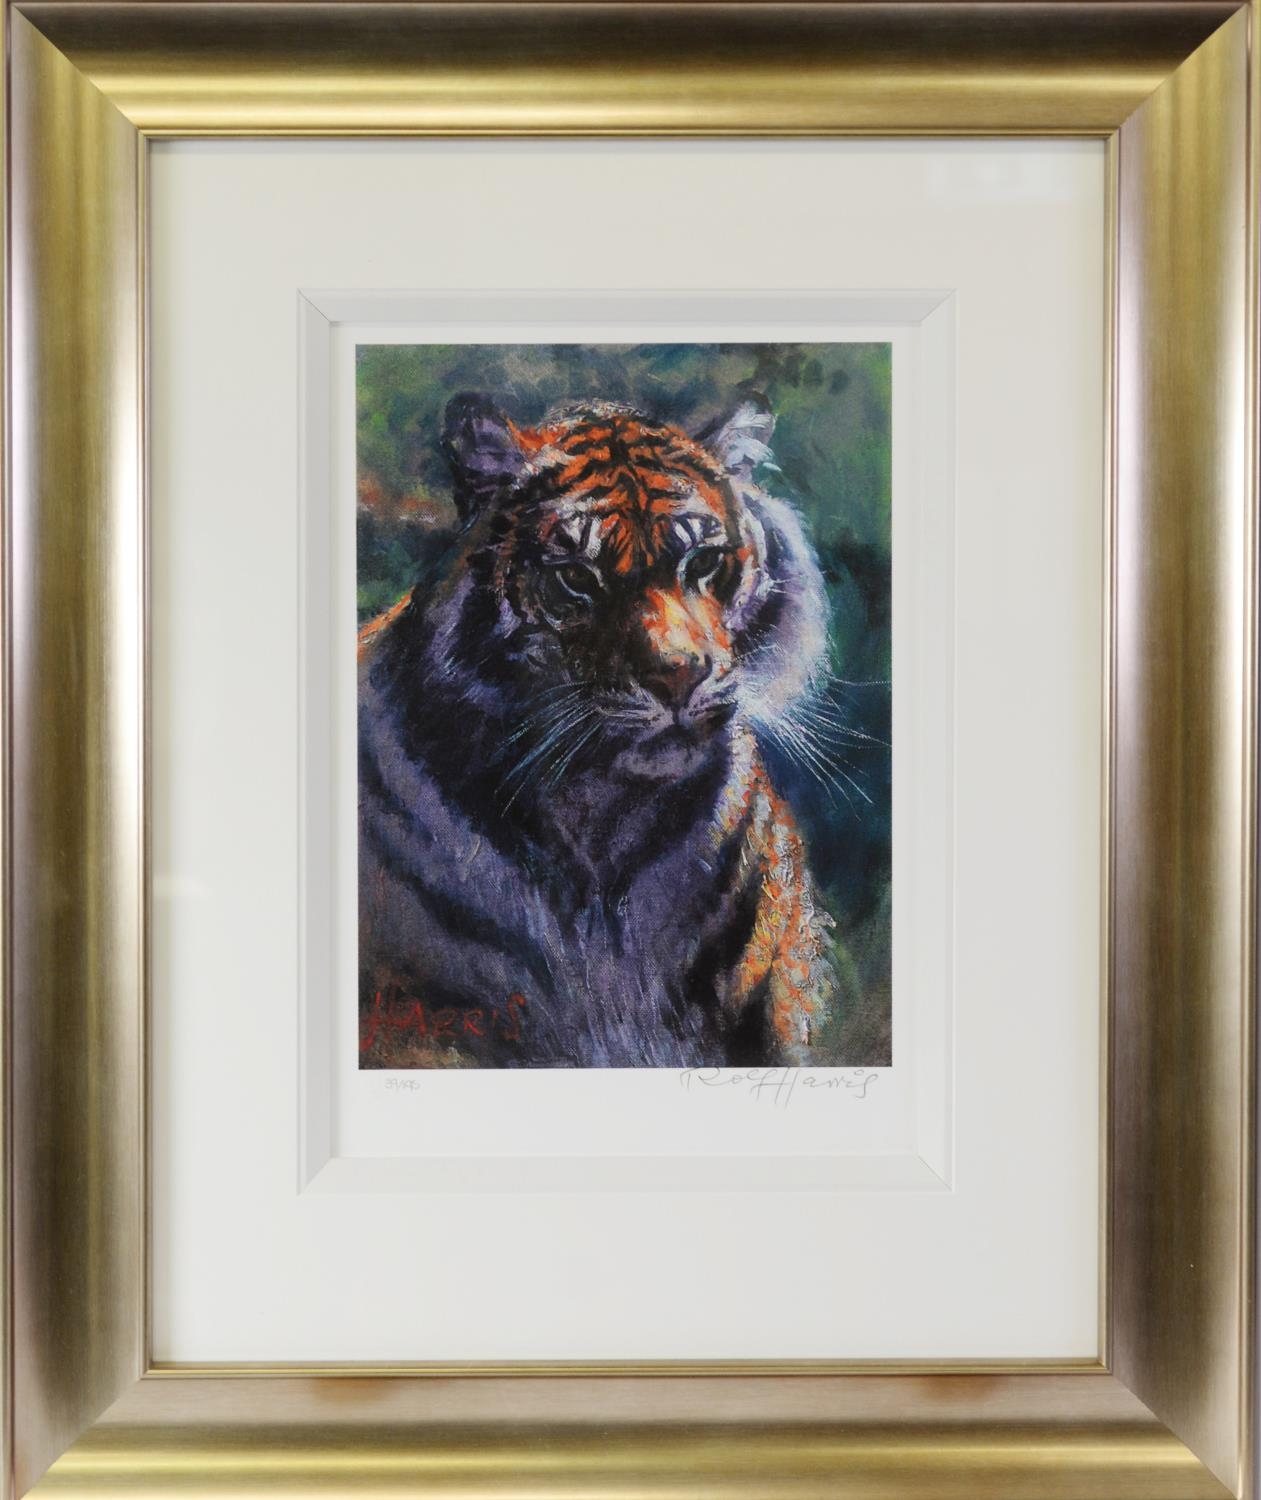 ROLF HARRIS (b.1930) ARTIST SIGNED LIMITED EDITION COLOUR PRINT ON PAPER ‘Tiger in the Sun’ (39/195) - Image 2 of 3